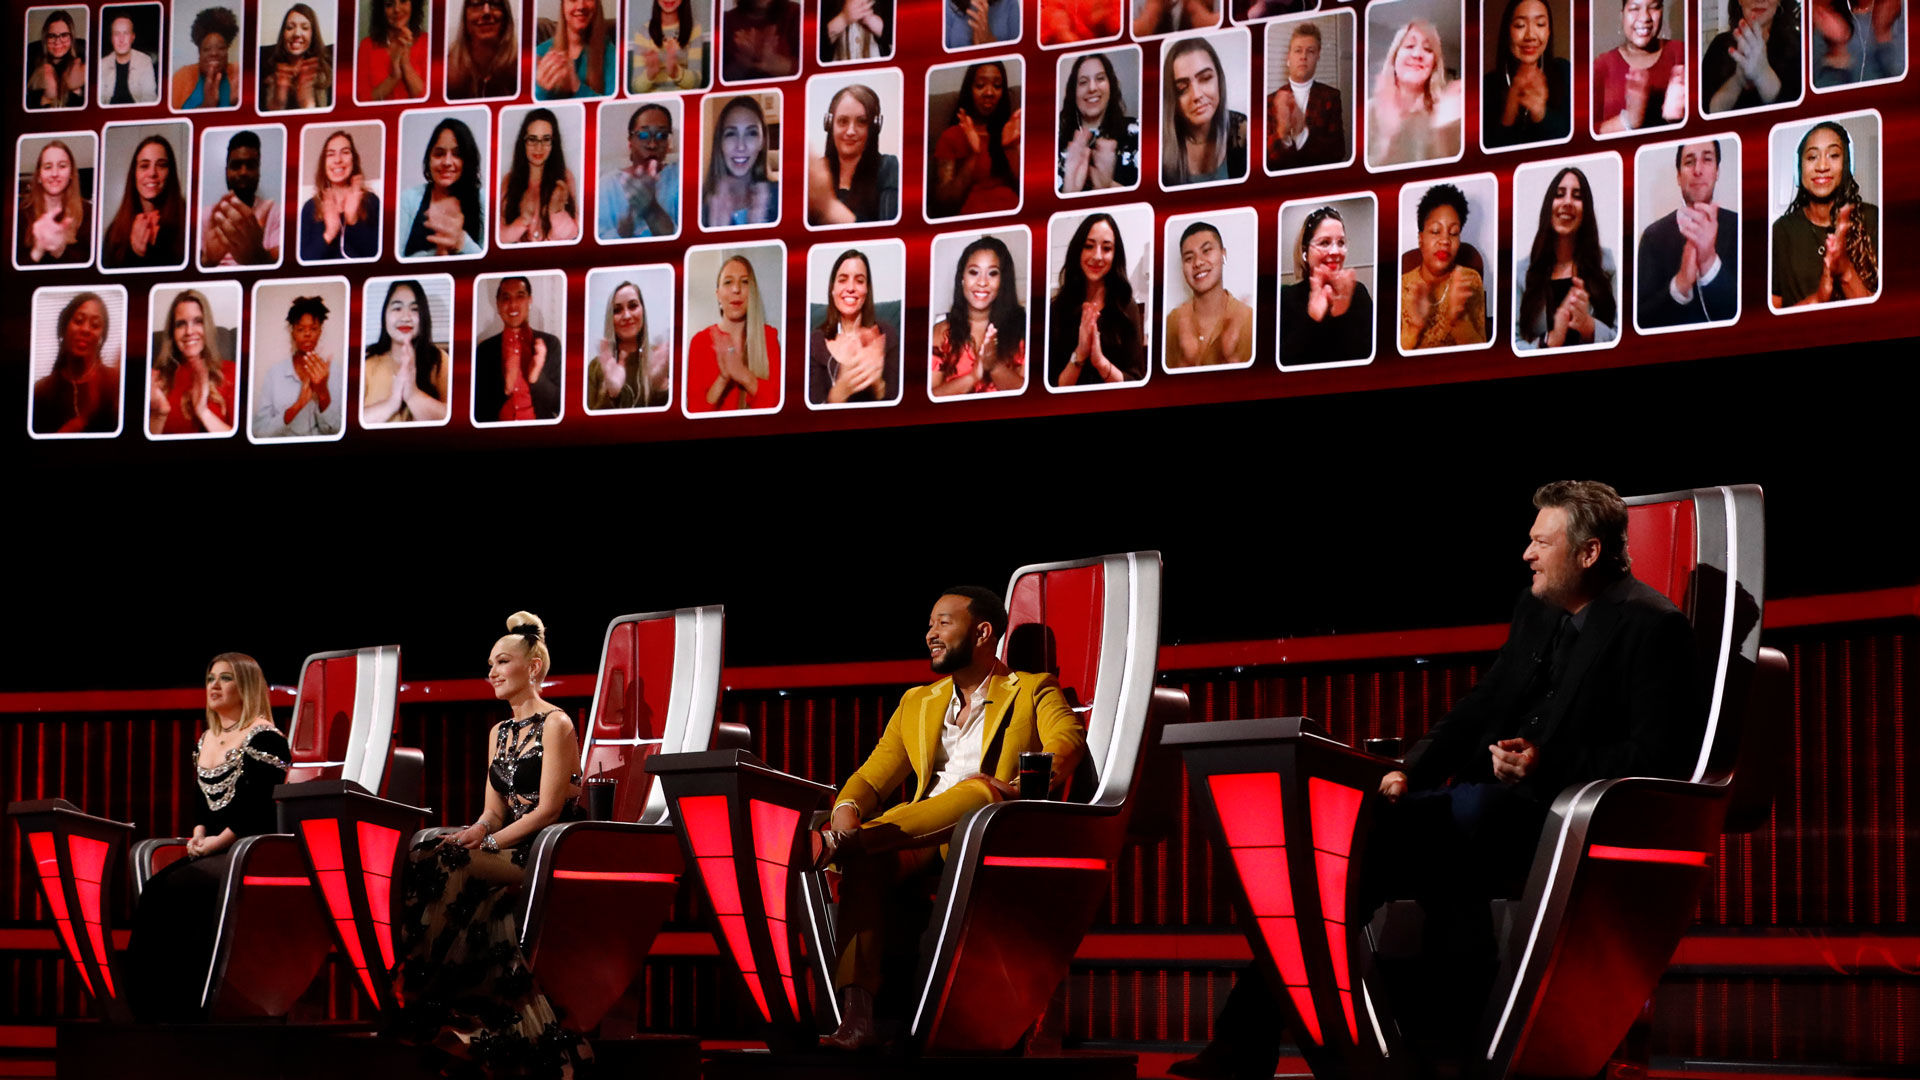 The Voice Show Summary, Episodes and TV Guide from onmy.tv